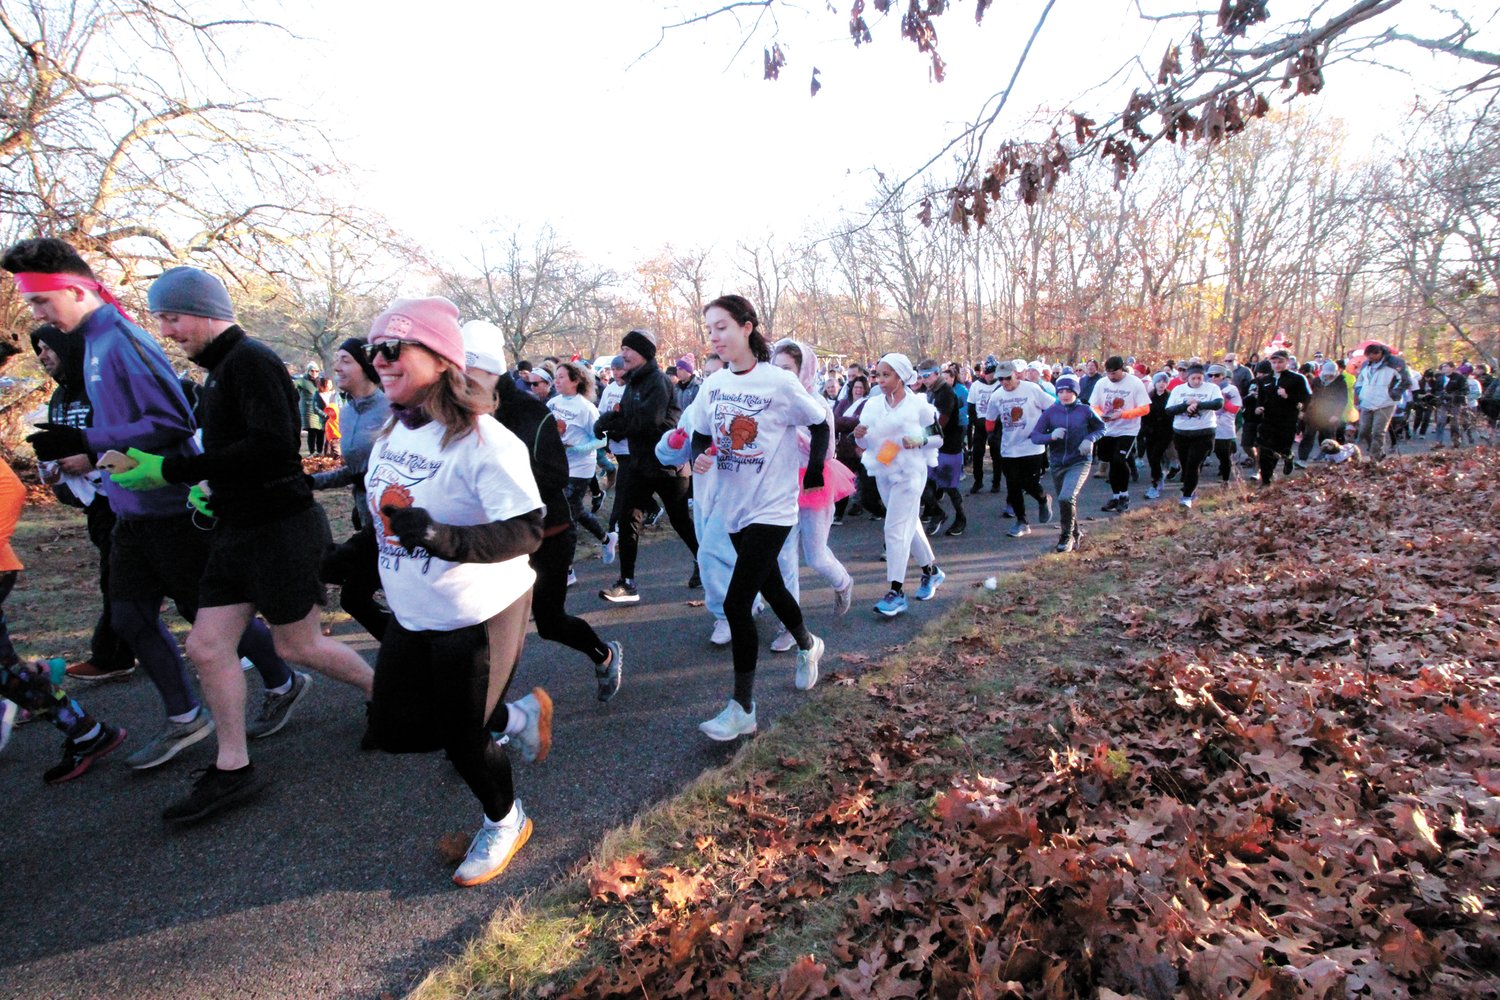 OFF AND RUNNING: On the word for club member Bev Wiley, nearly 400 runners and walkers set off to cover the 5K on City Park trails Thanksgiving morning.